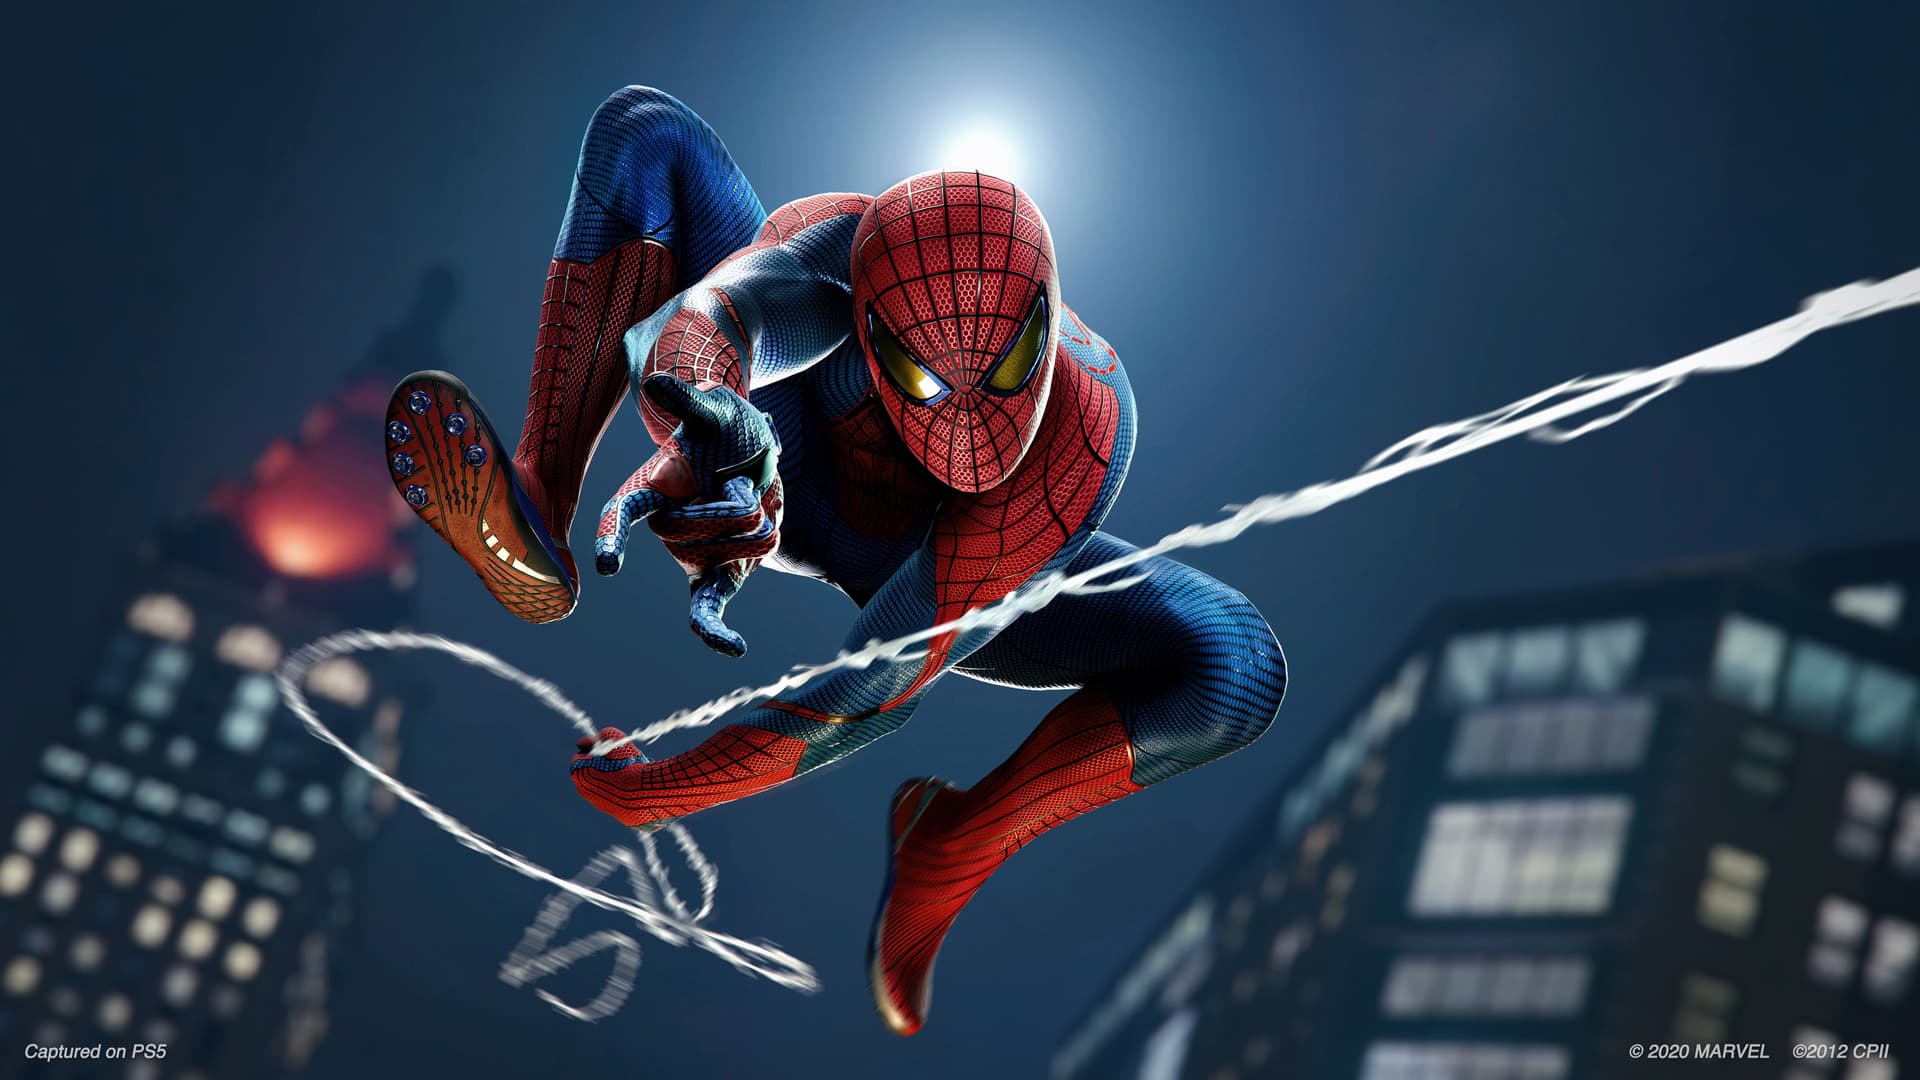 Spider Man Ps4 How To Change Time Of Day Marvel S Spider Man Remastered First Look At The Game On Playstation 5 Marvel